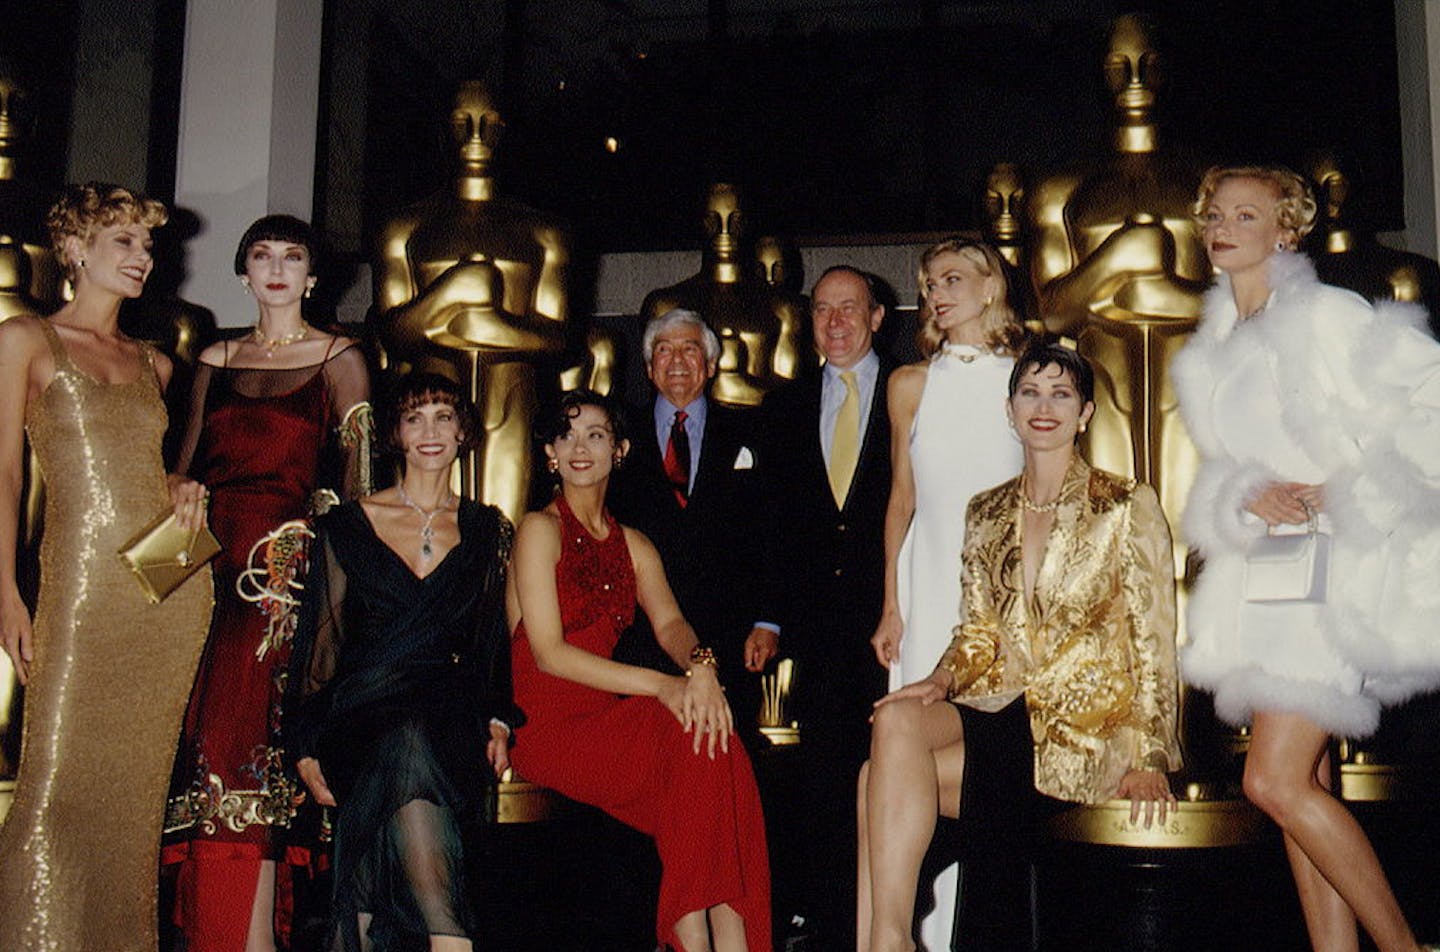 Elegantly dressed women and men pose in front of tall, gold statues.